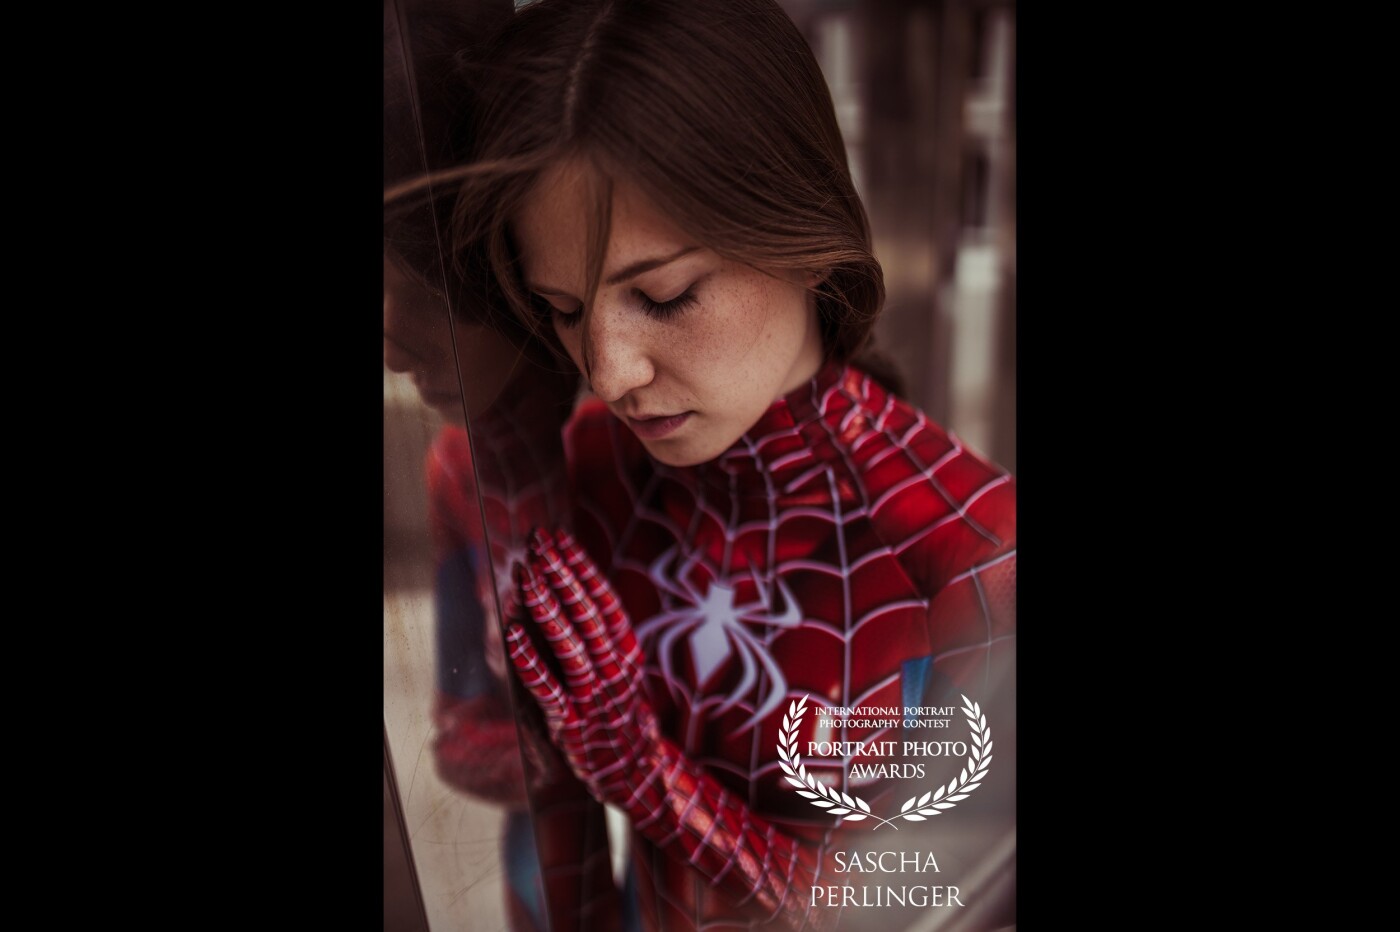 normally I don't shoot cosplay, but I couldn't get this spider girl idea out of my head. many thanks to @mascha_sonnenschein who did an amazing job. you can see the full series in my Instagram feed.